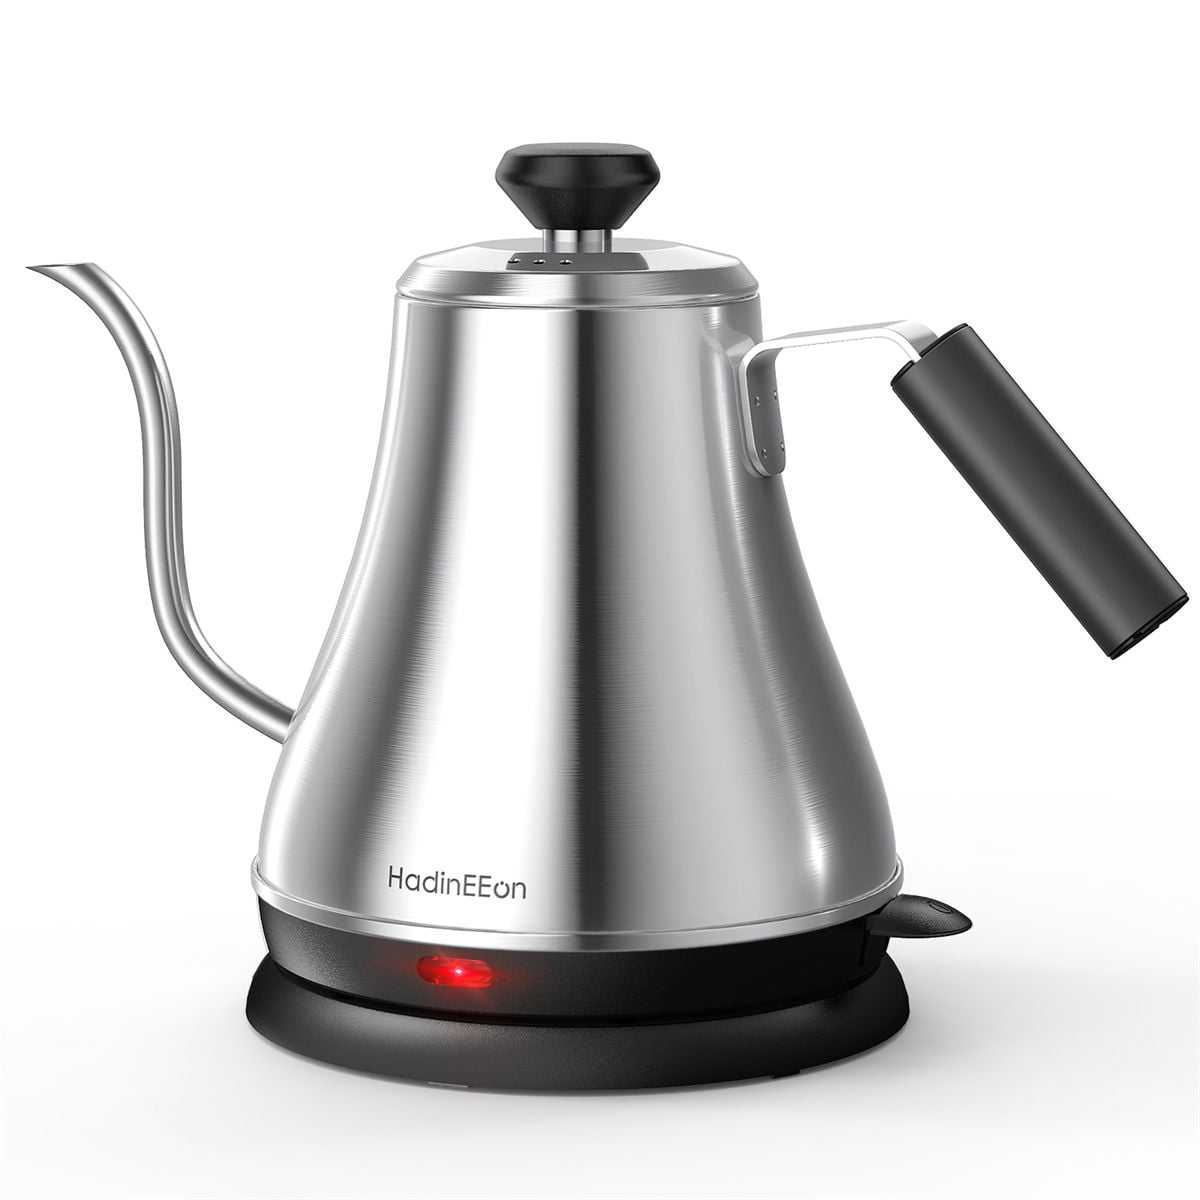 MAKE TEA OR COFFEE QUICK - HadinEEon Electric Kettle Review 